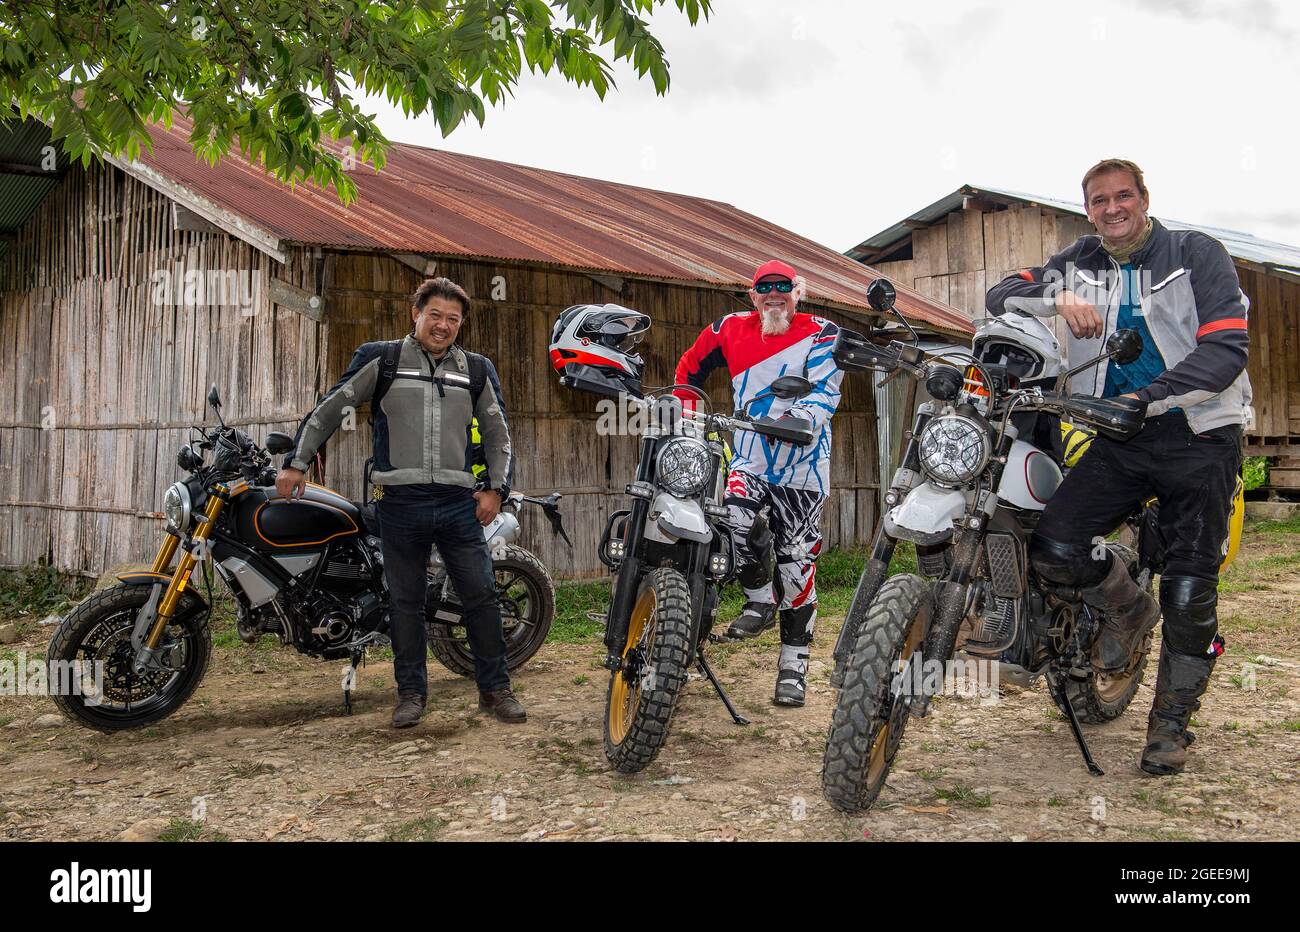 men stopping with their motorcycle's in Thai village Stock Photo